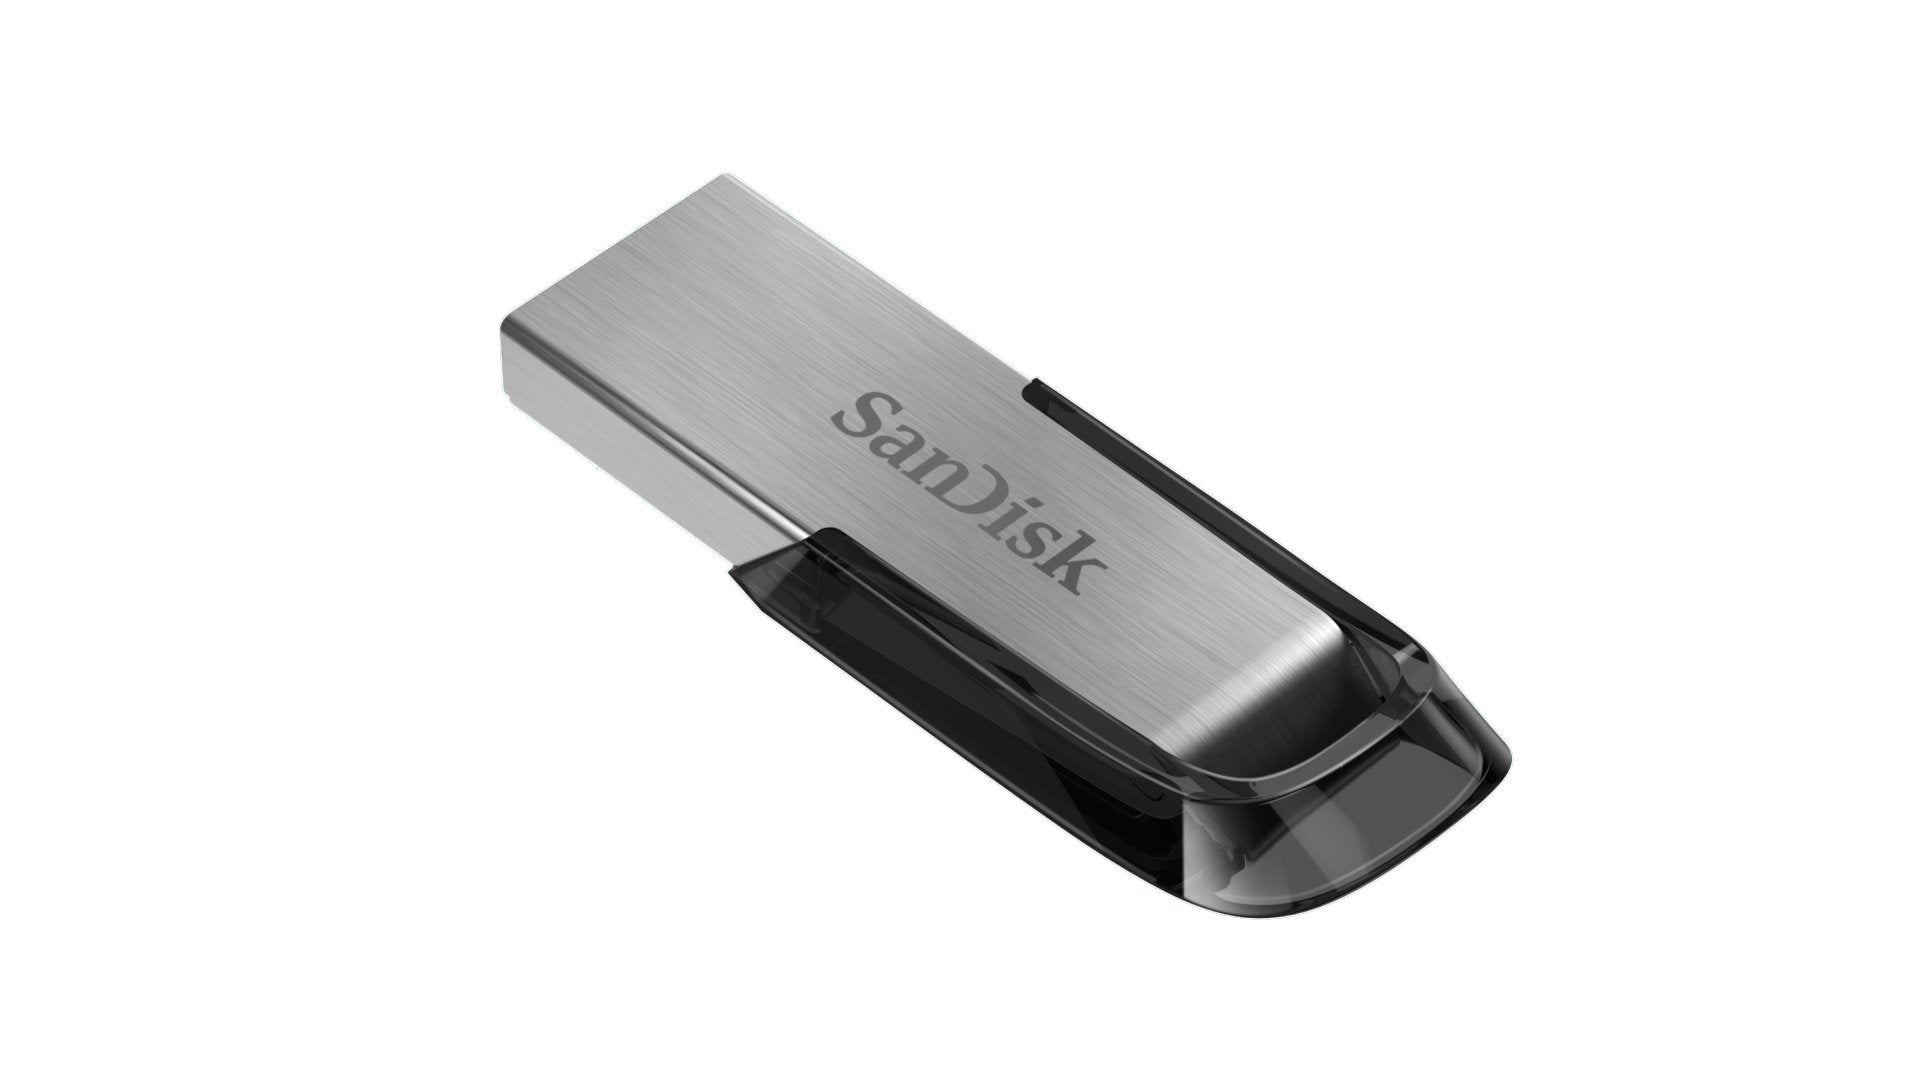 Sandisk ultra flair 3.0 flash drive up to 150mb/s